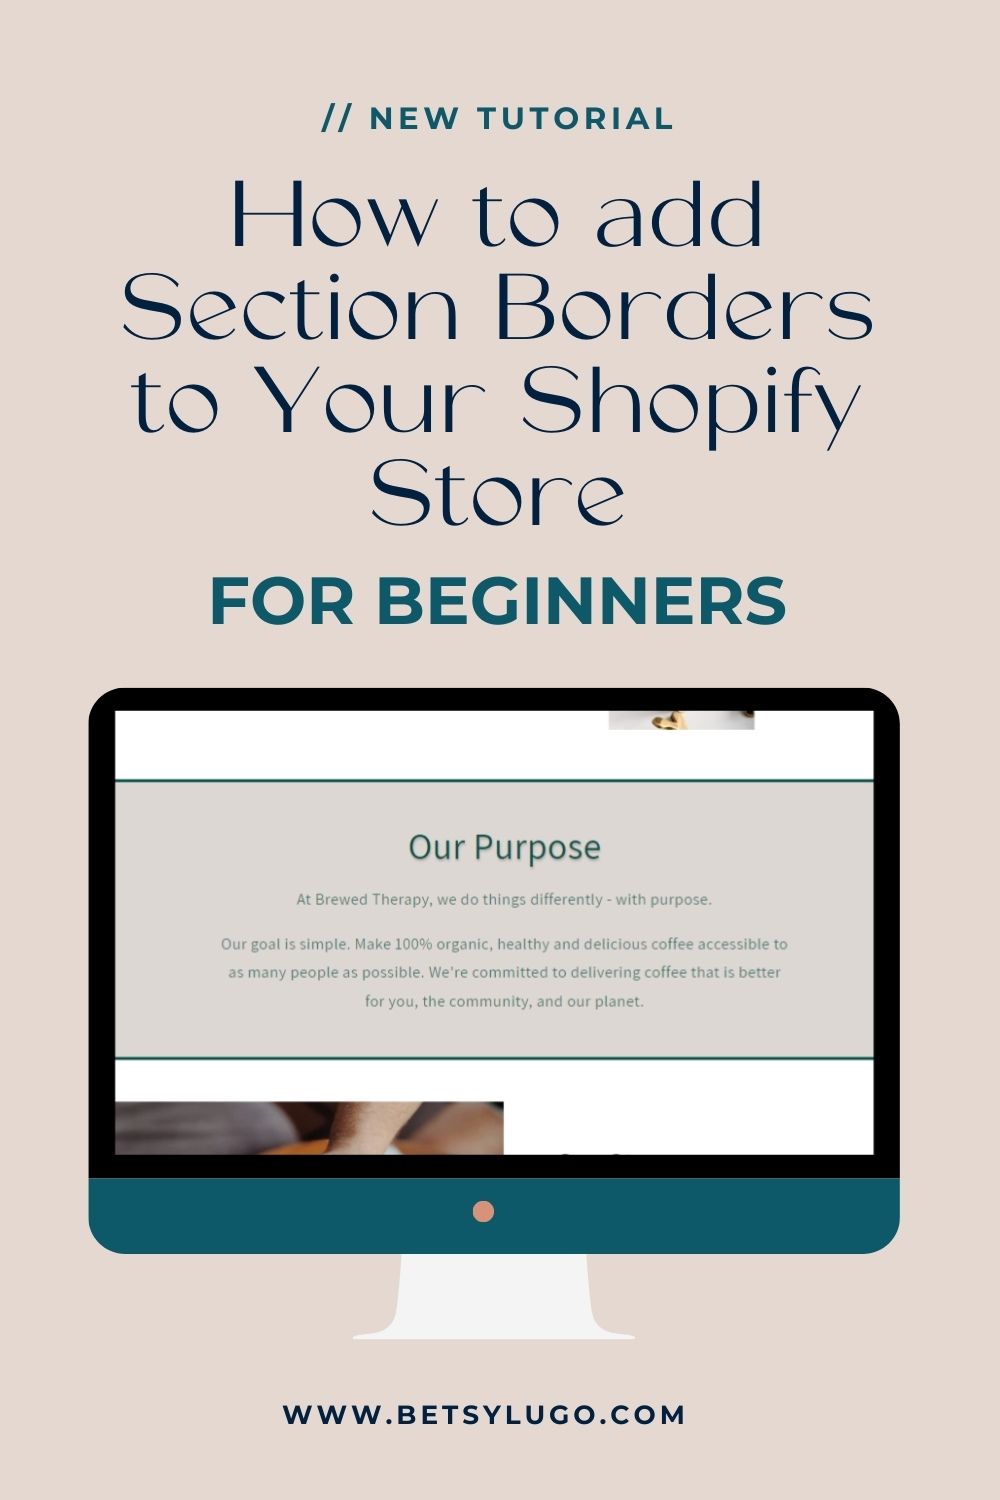 How to add section borders to your shopify store for beginner pin image
